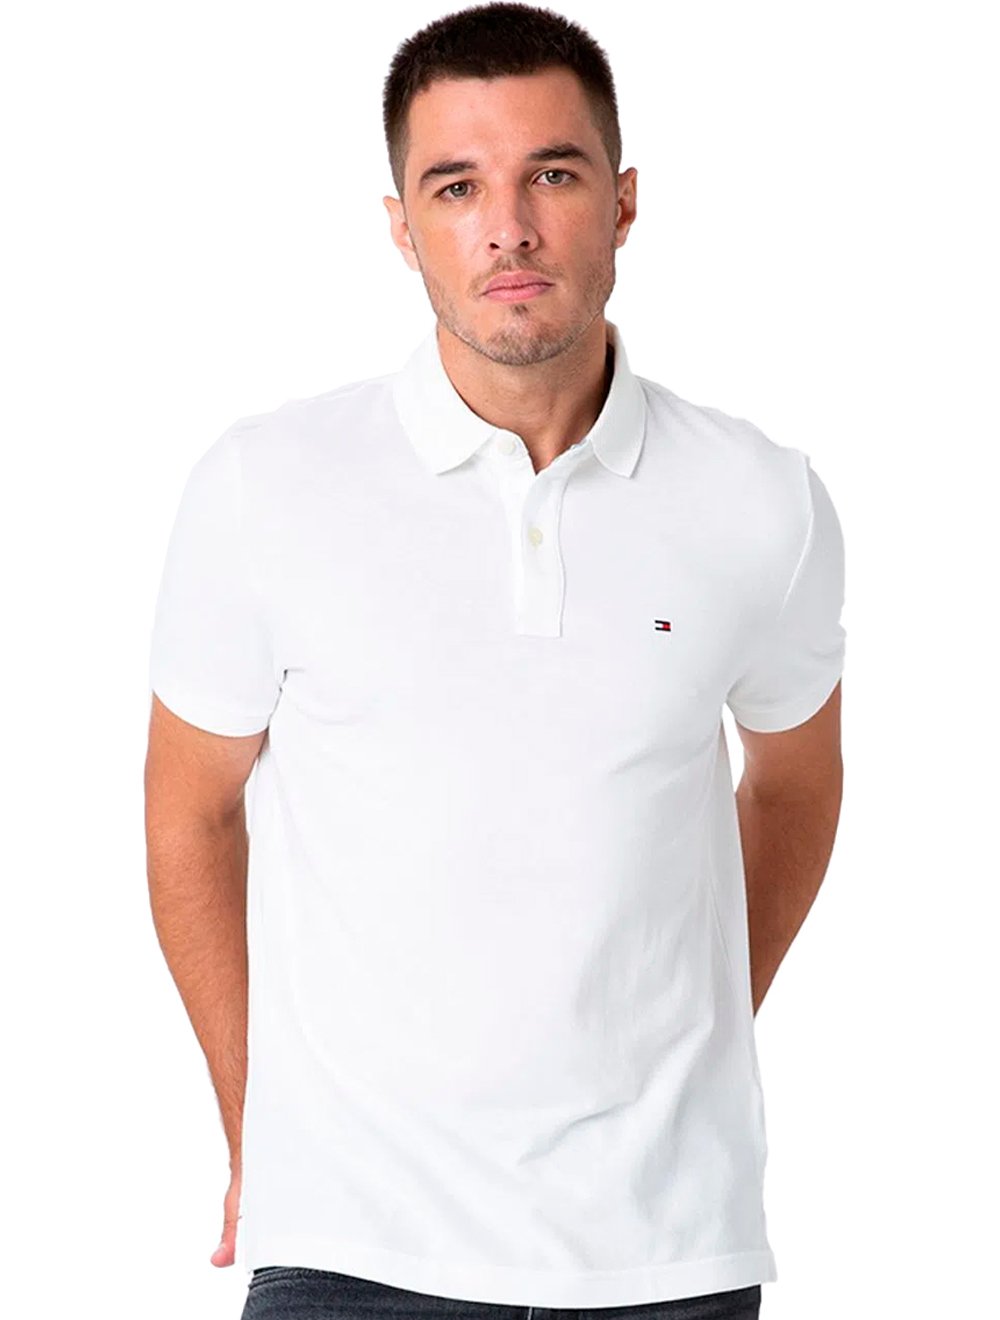 Polo Tommy Hilfiger Masculina Coupe Sur Ivy Branca